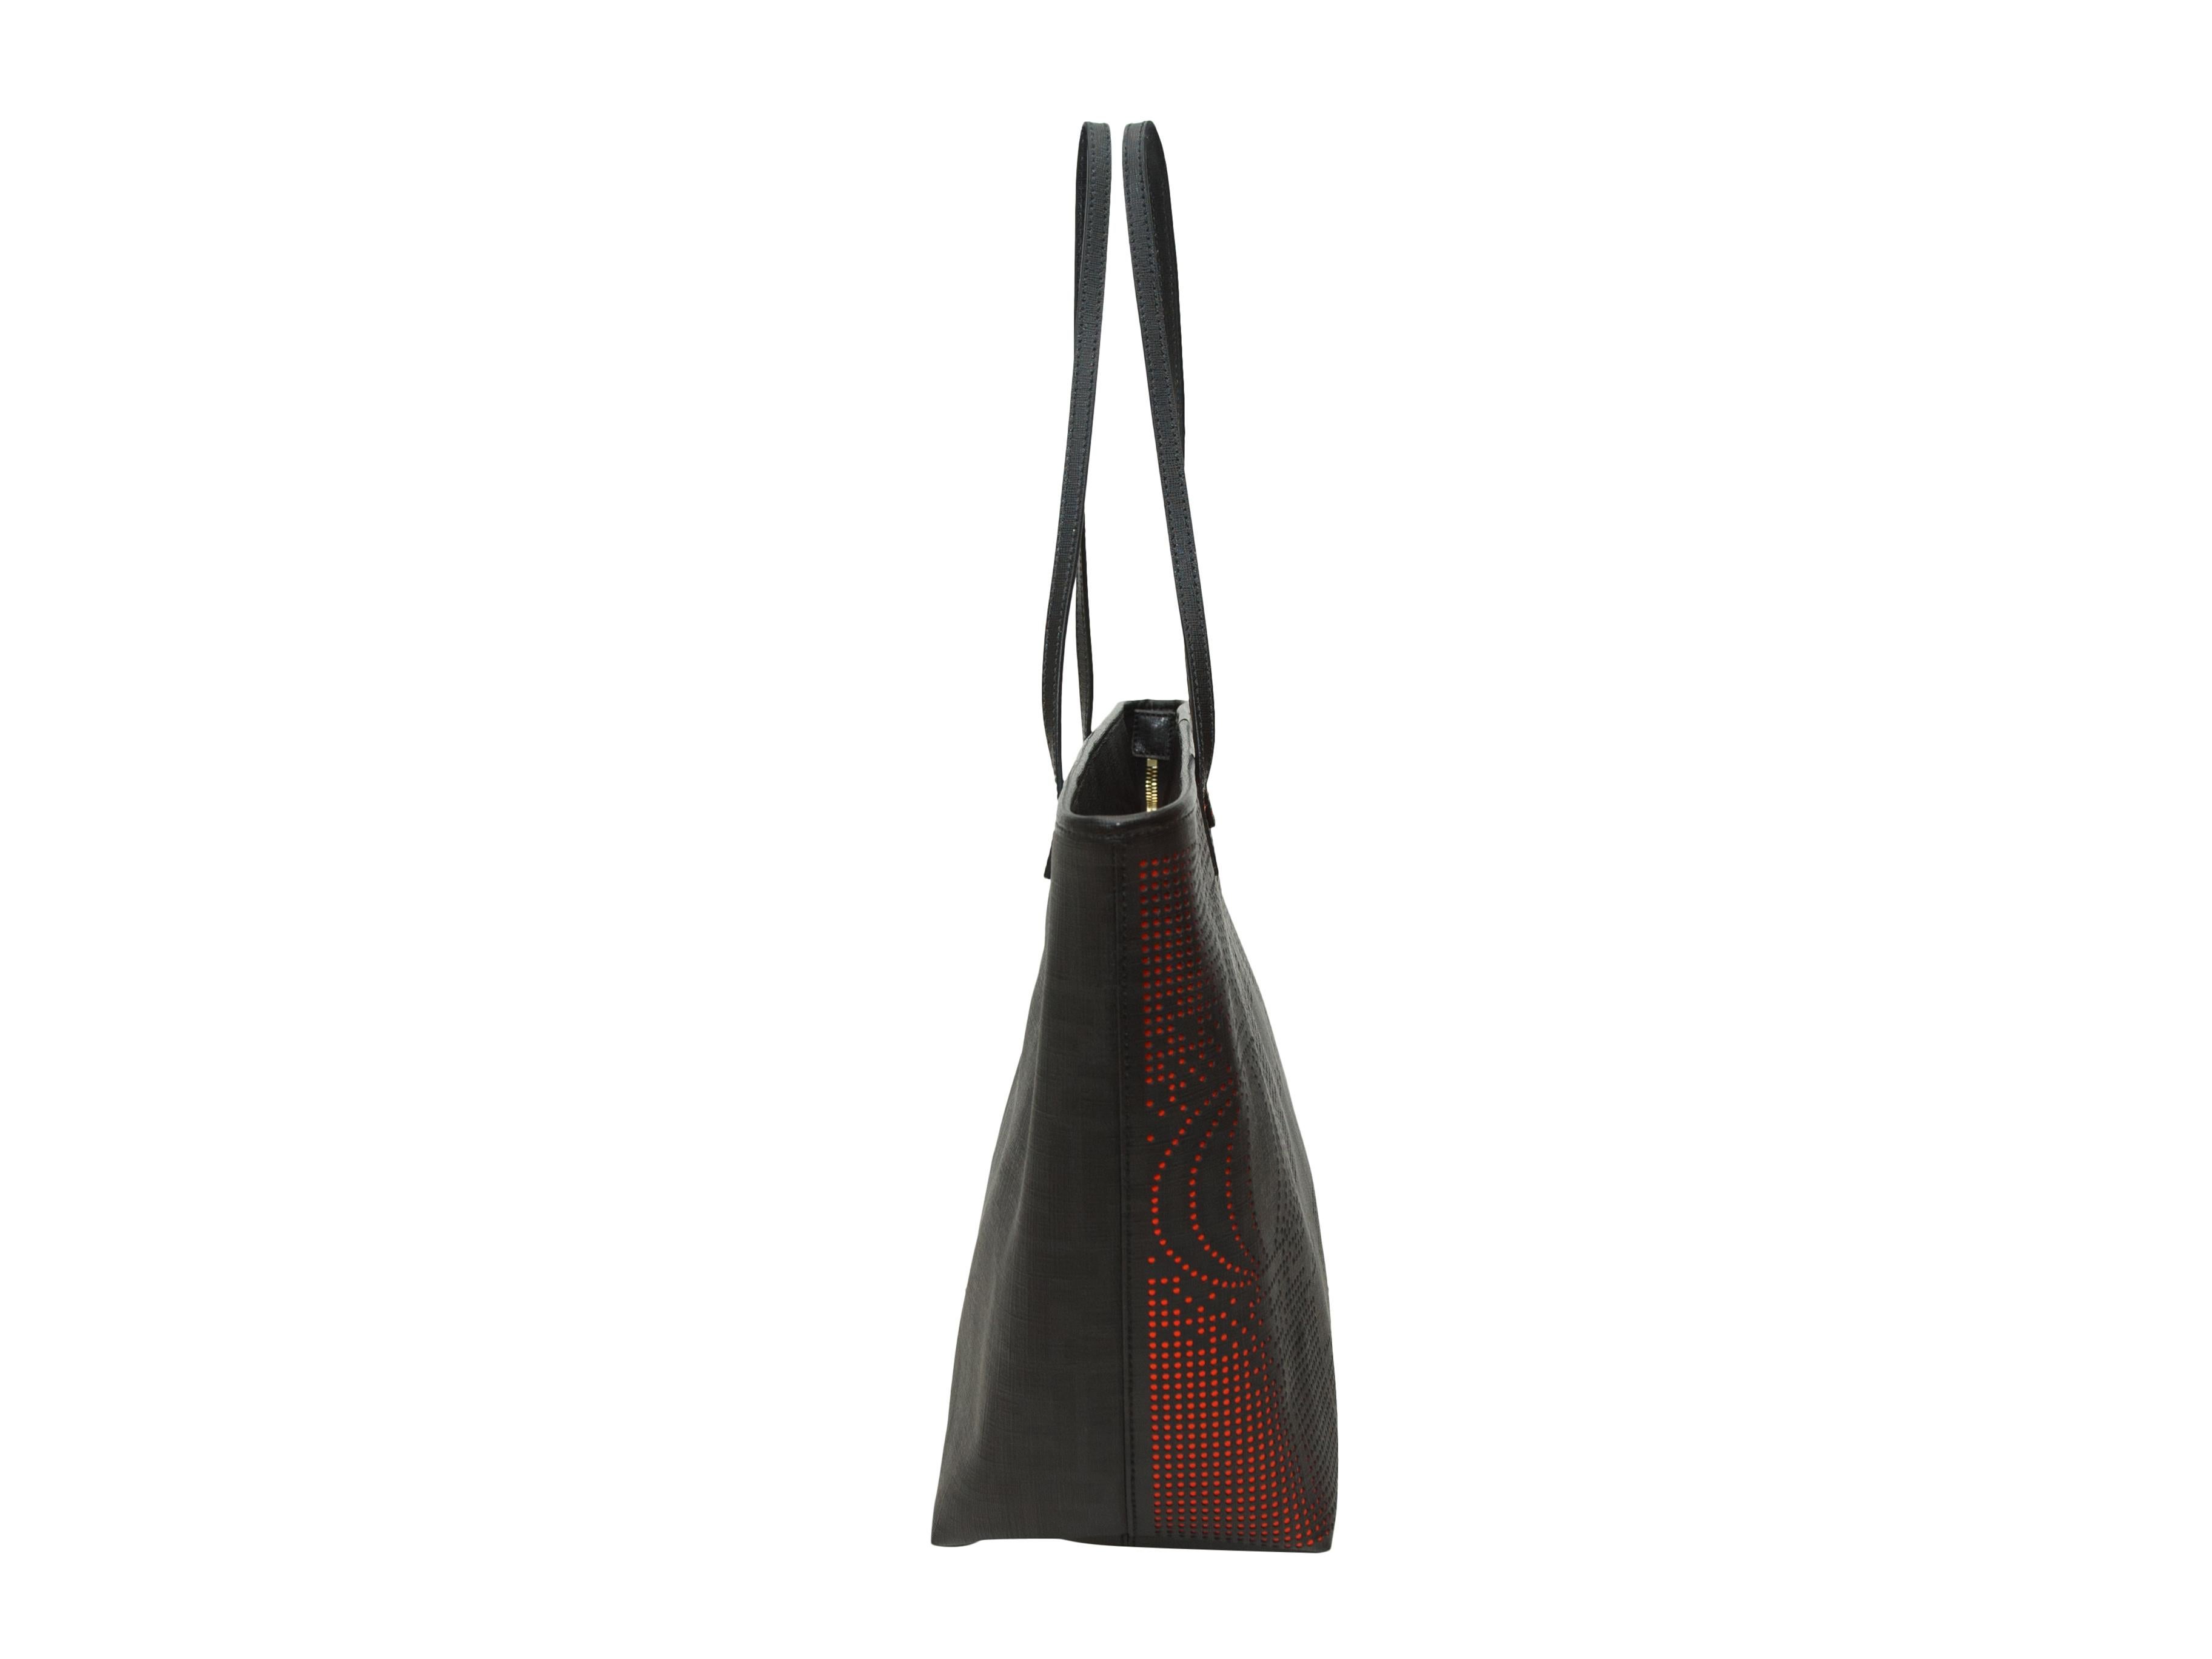 Product details: Black Zucca tote bag by Fendi. Metallic red detailing throughout. Zip closure at top. 17